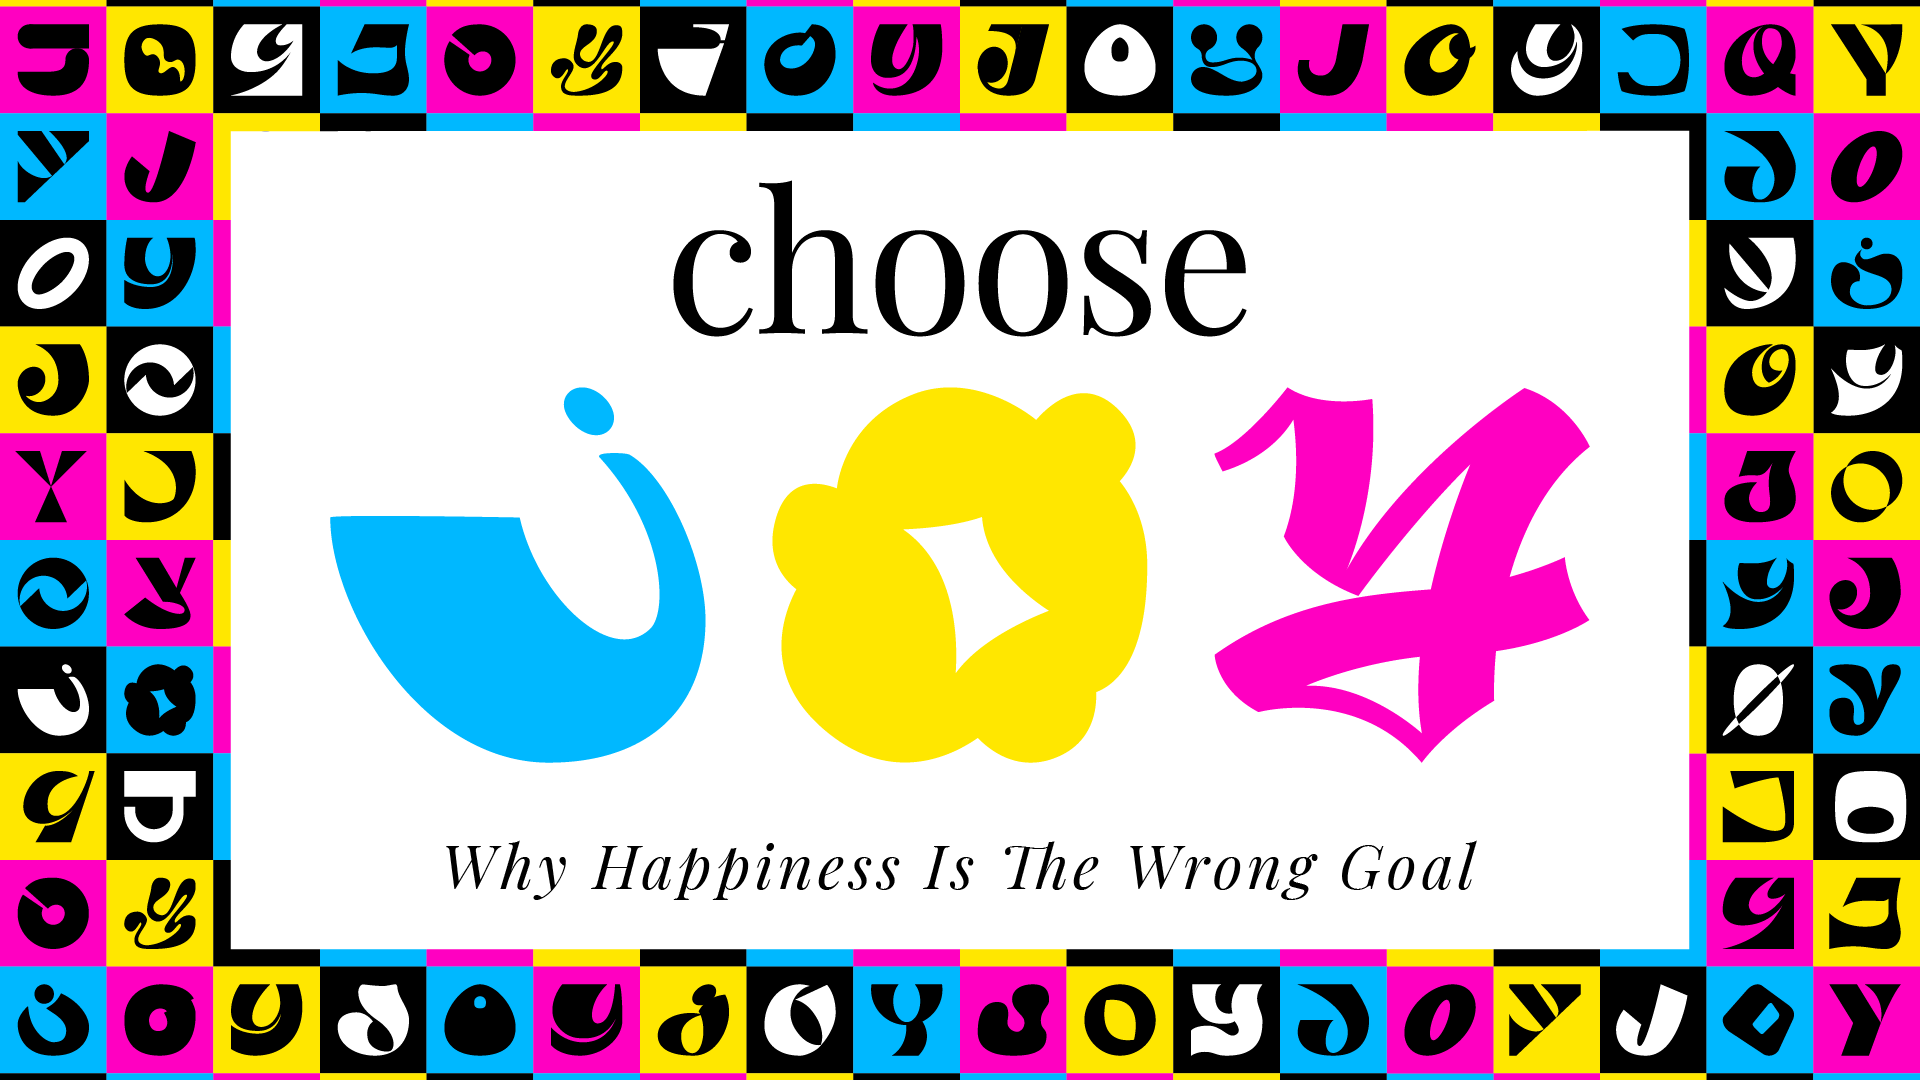 Choose Joy: Why happiness isn’t the goal